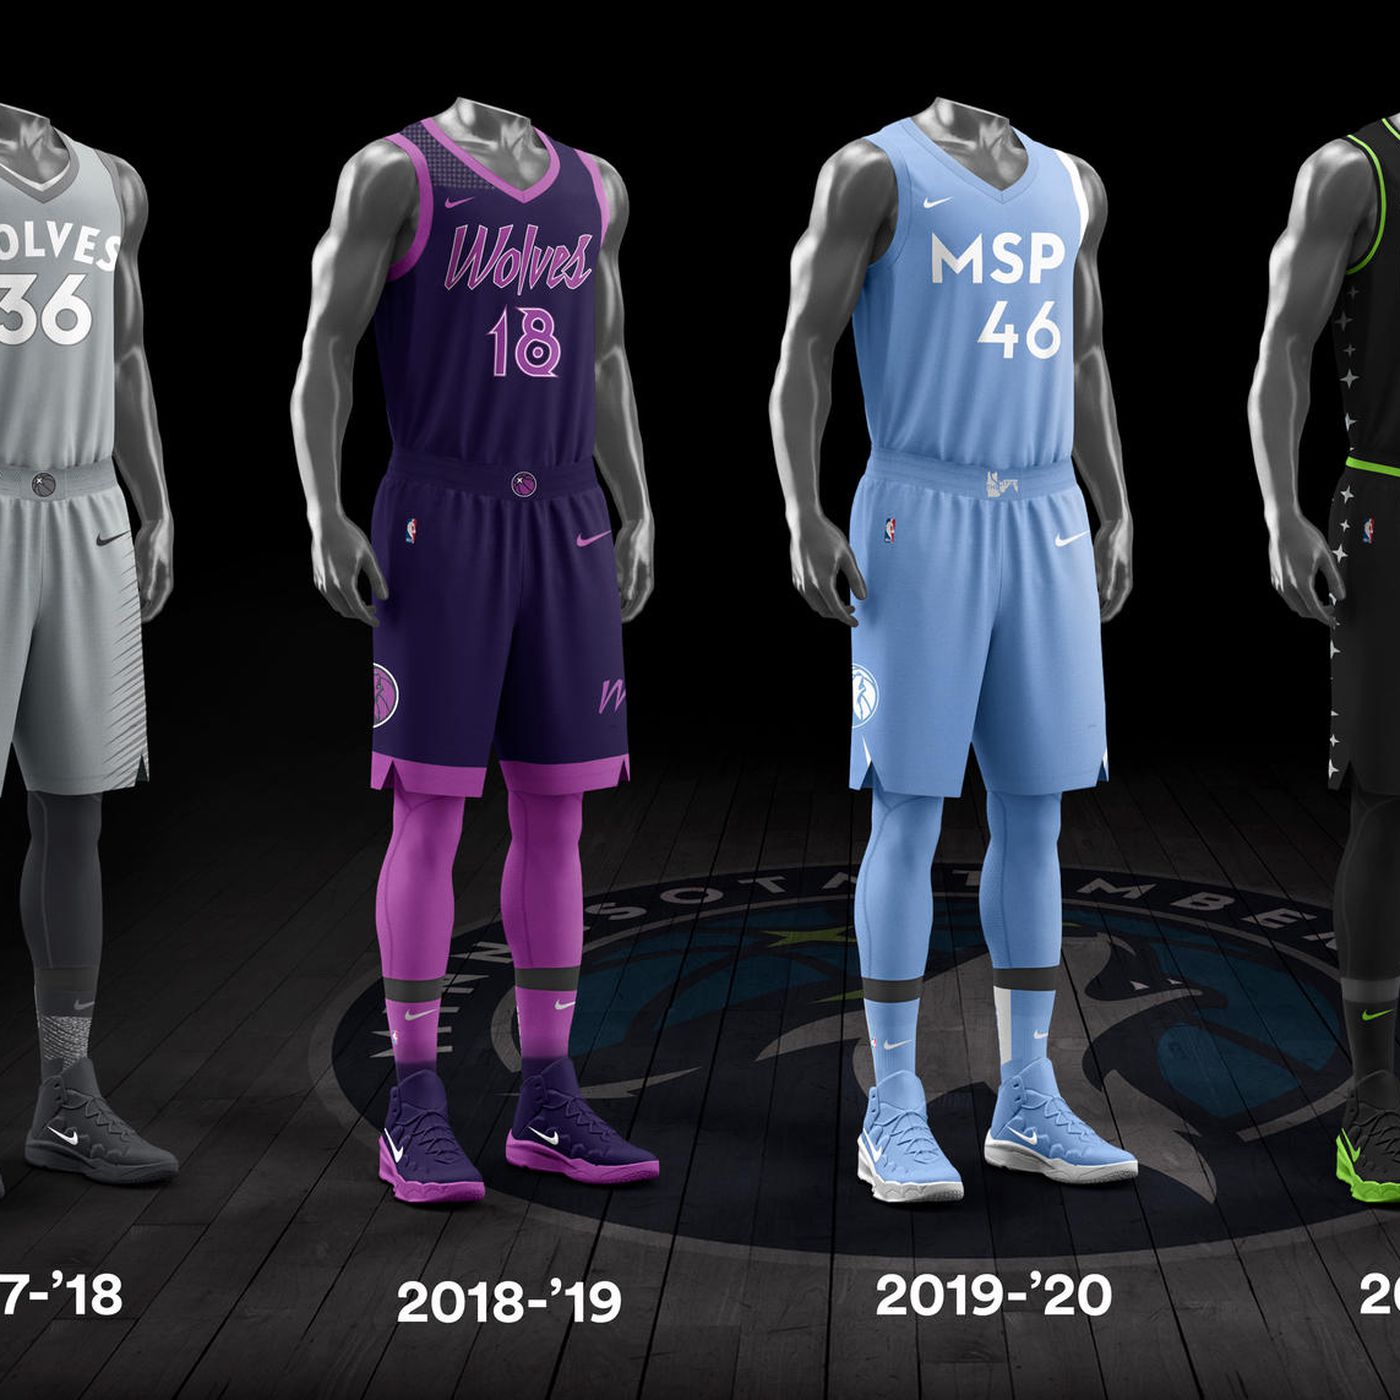 NBA's City Edition jerseys for 2022-23 are out. Here are some of